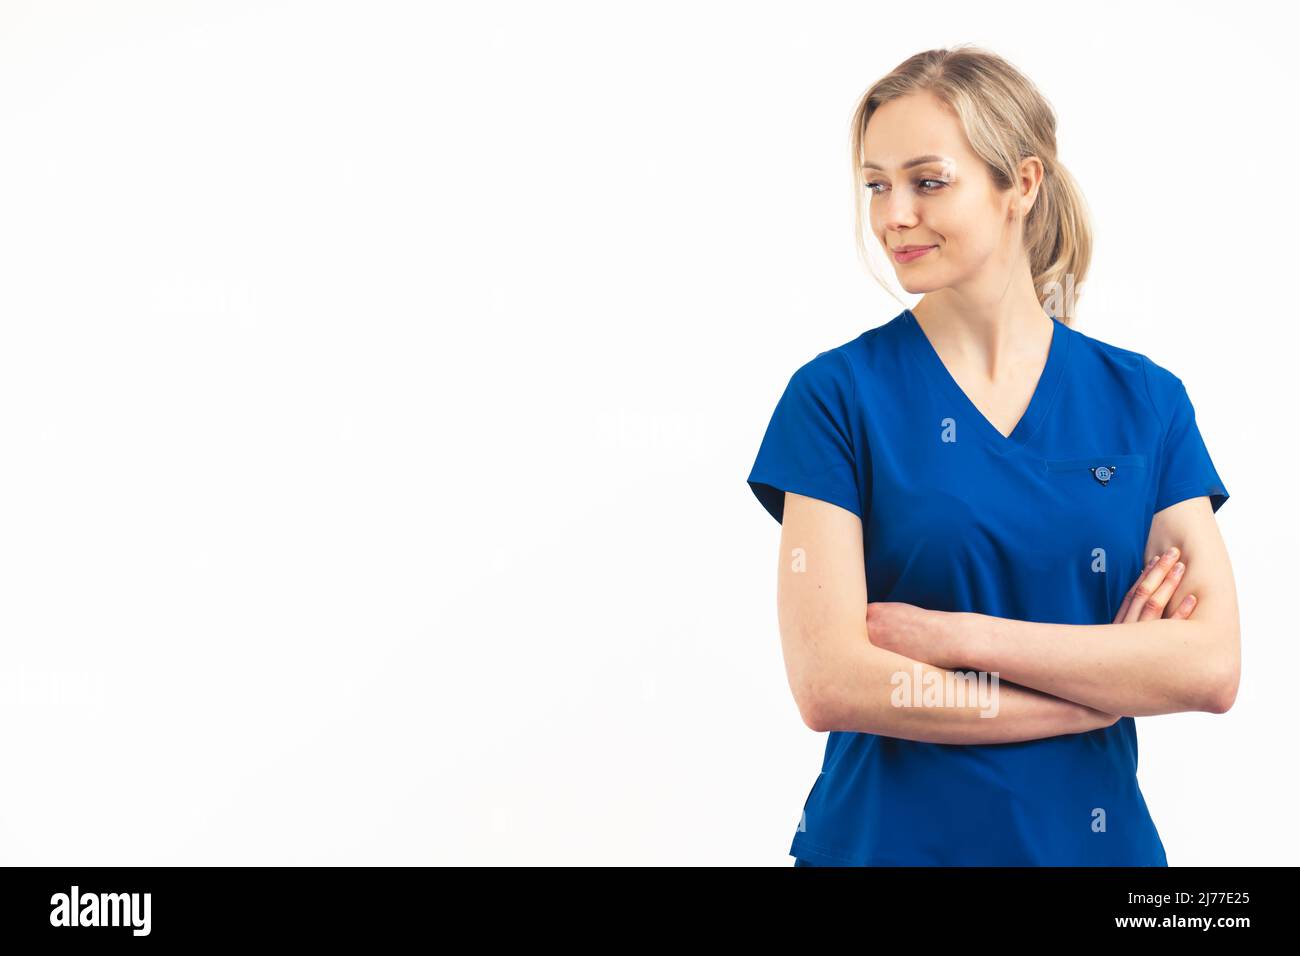 European blonde female helath care worker in a navy blue medical uniform standing with her arms crossed on her chest looking away. Studio shot on white background, copy space. High quality photo Stock Photo